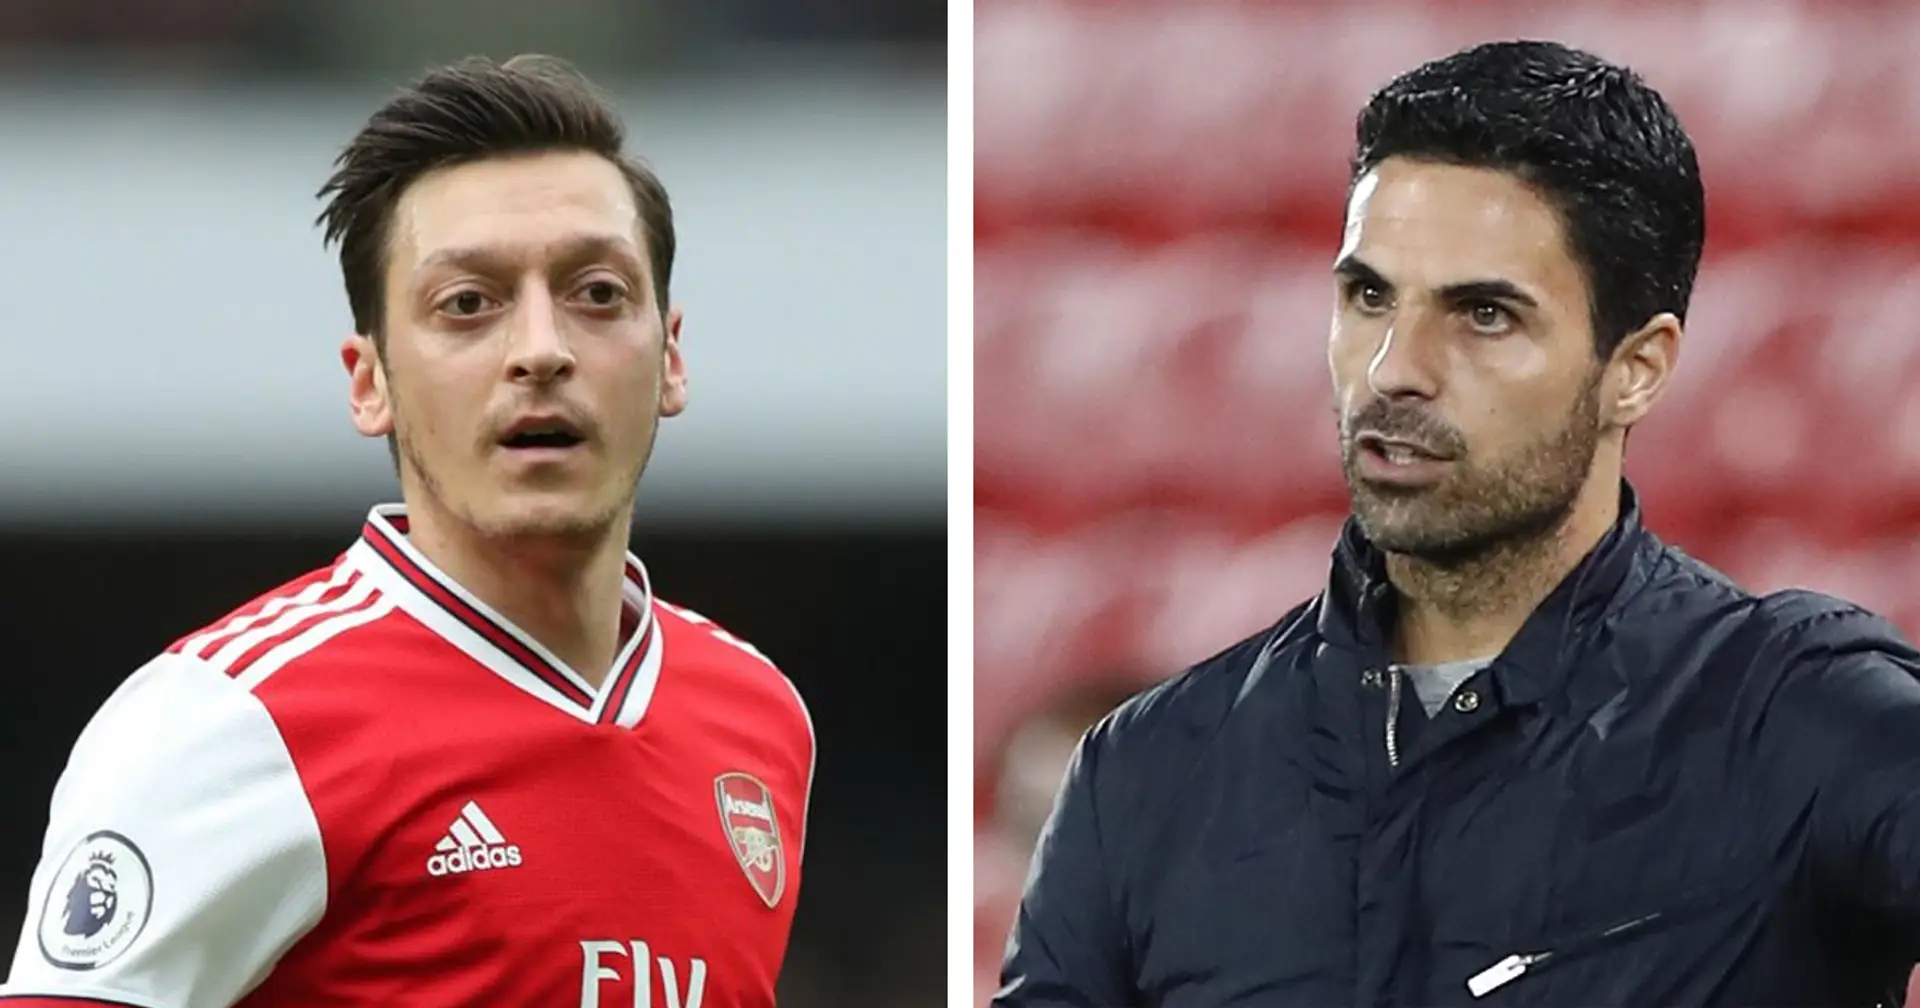 Mikel Arteta sets out his demands for Mesut Ozil and every other Gunner to get their chances 